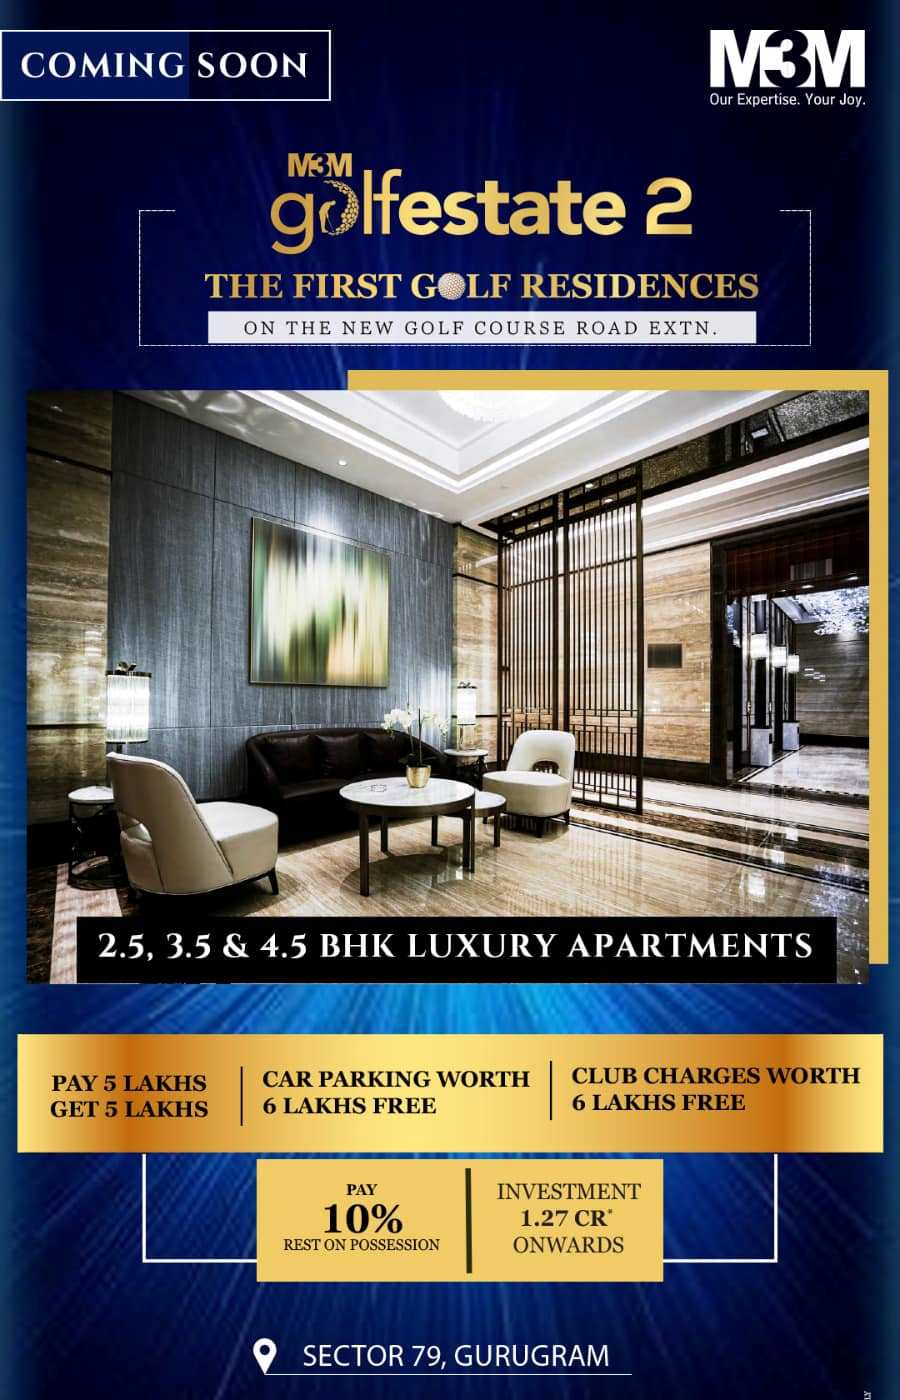 After the success of M3m Golf Estate M3m Presents its flagship project at Golf Estate 2.0, Gurgaon Update